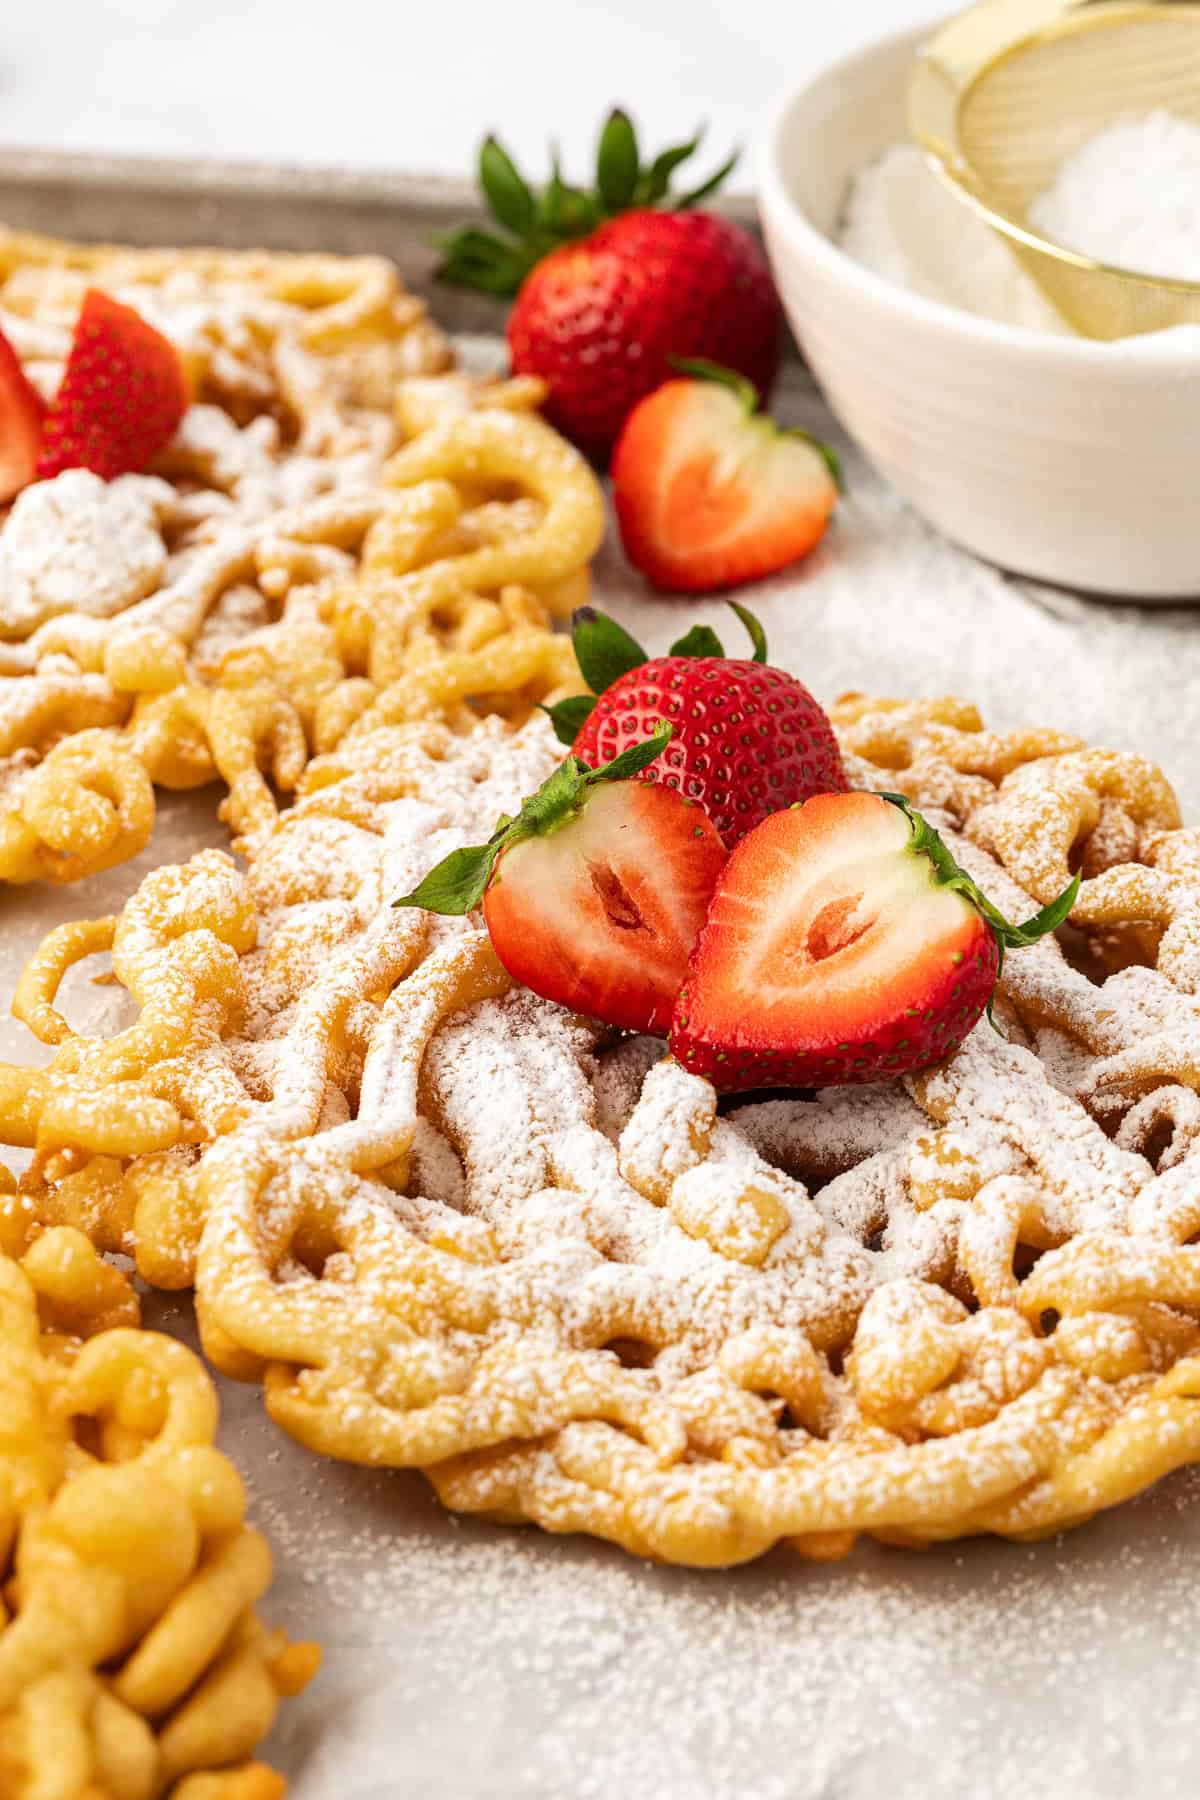 close up of funnel cakes on a baking sheet topped with powdered sugar and fresh strawberries with a white bowl of powdered sugar and a sifter beside them